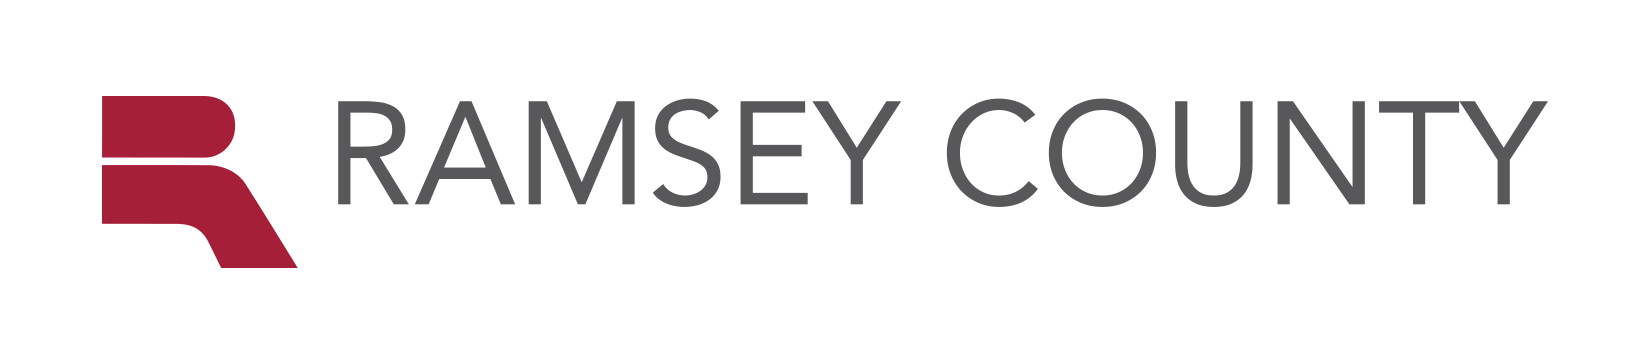 Ramsey County Logo with Ramsey R